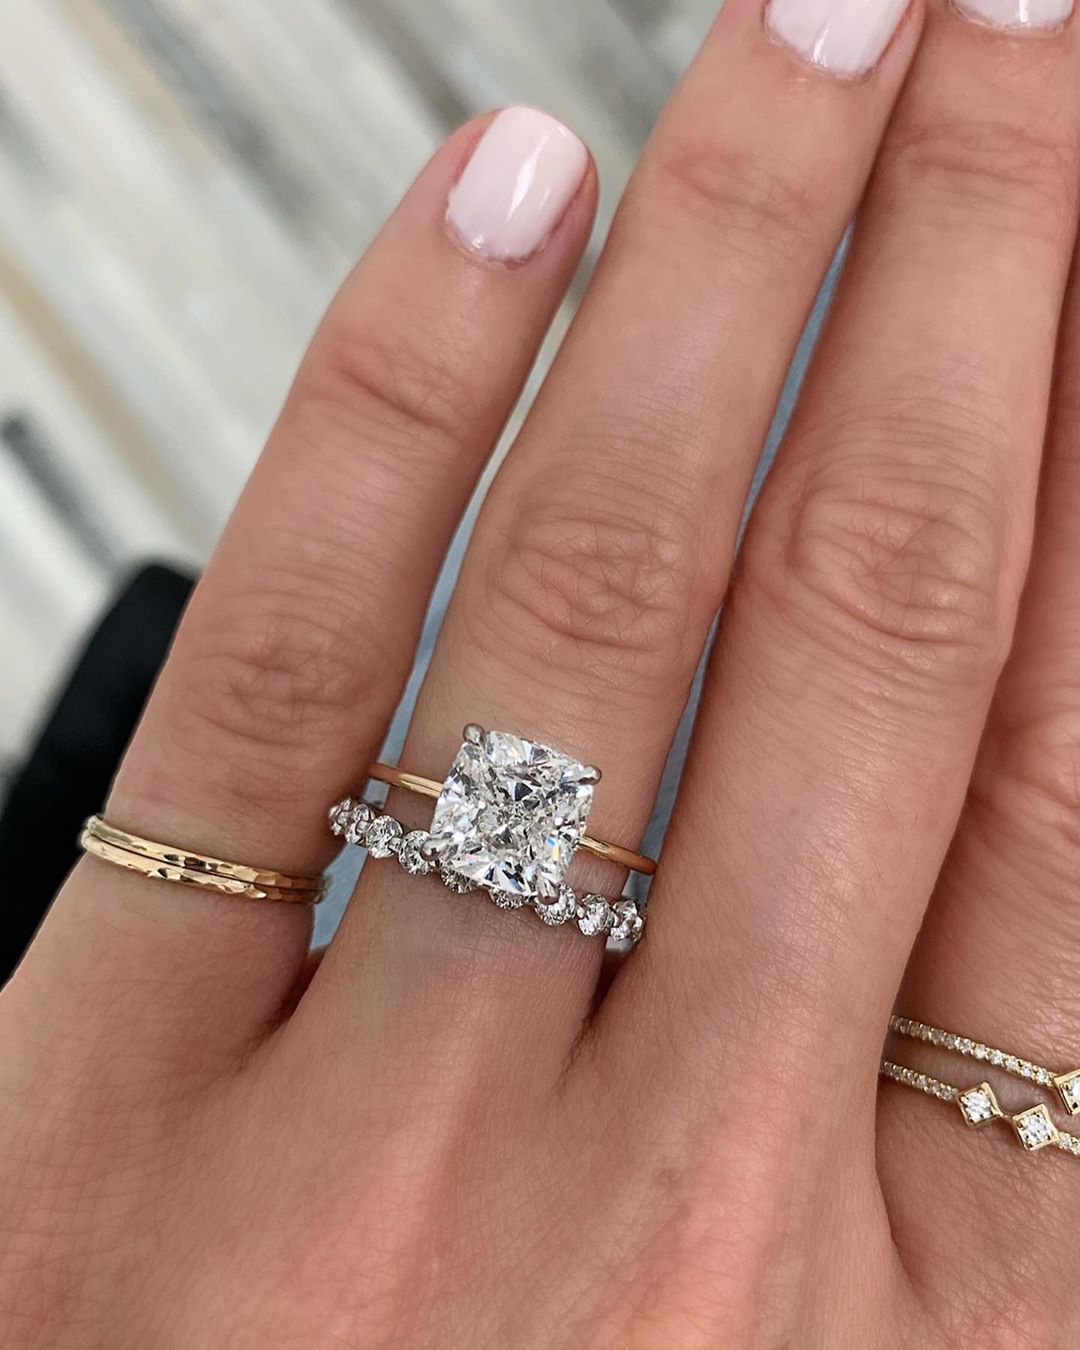 39 Timeless Classic And Simple Engagement Rings